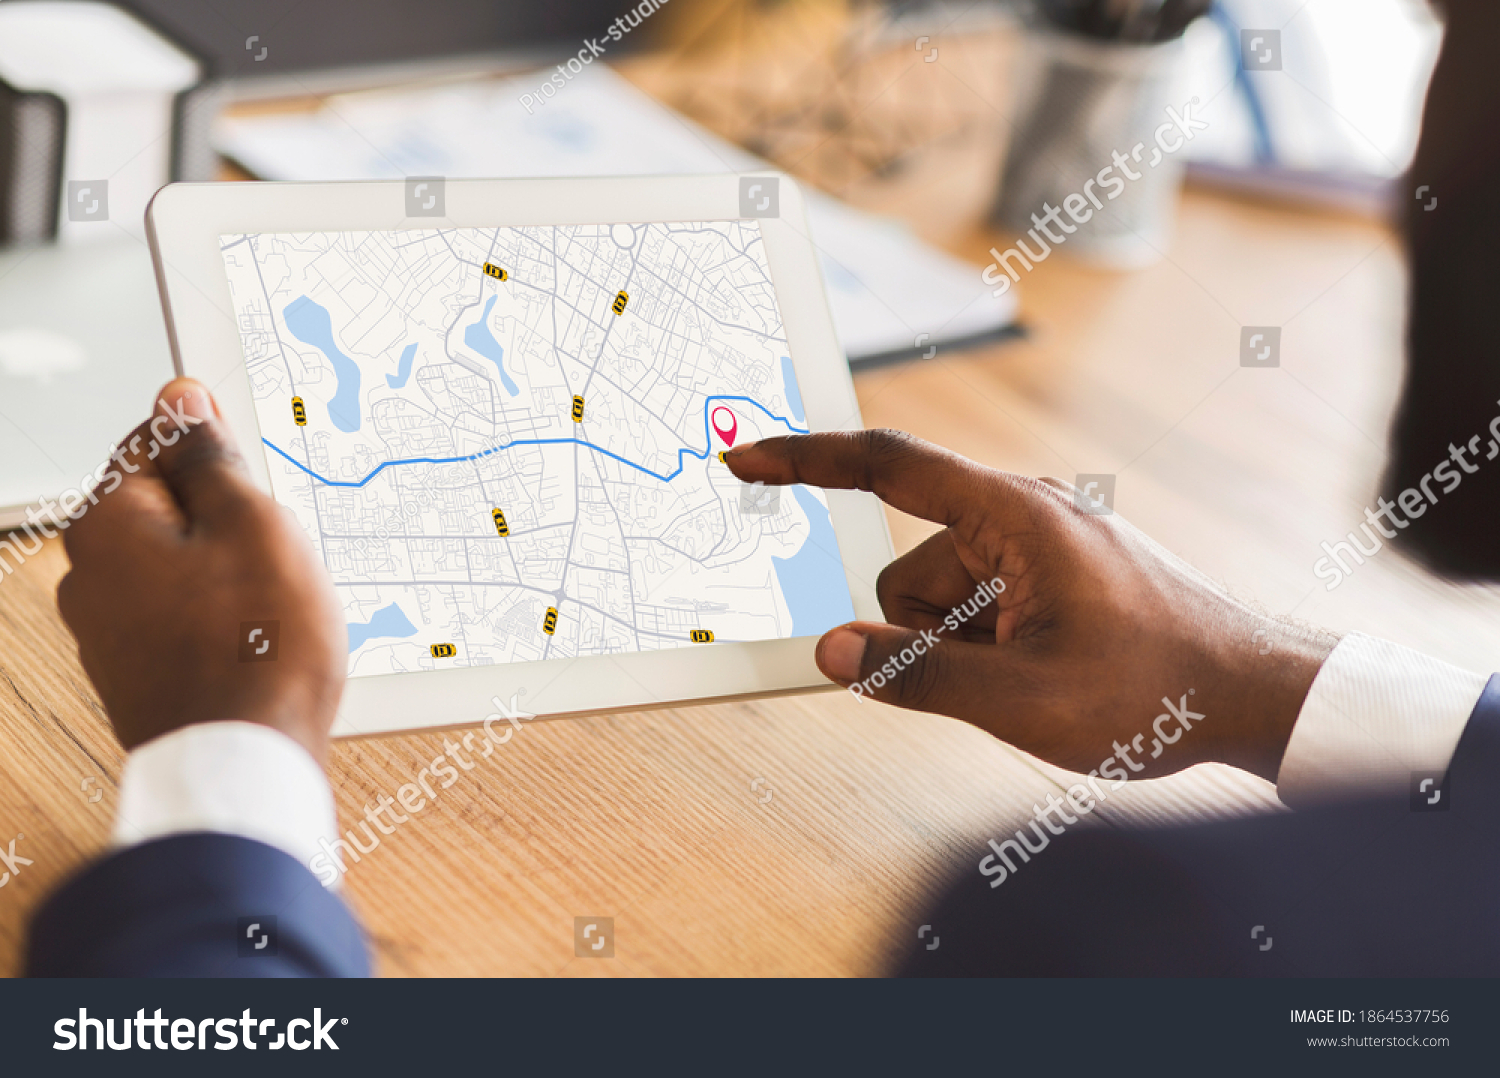 Unrecognizable Black Businessman Using Taxi Services App On Digital Tablet In Office, Looking At Virtual Map With GPS Trackers, Checking Nearest Cab, Creative Collage For Transportration Concept #1864537756